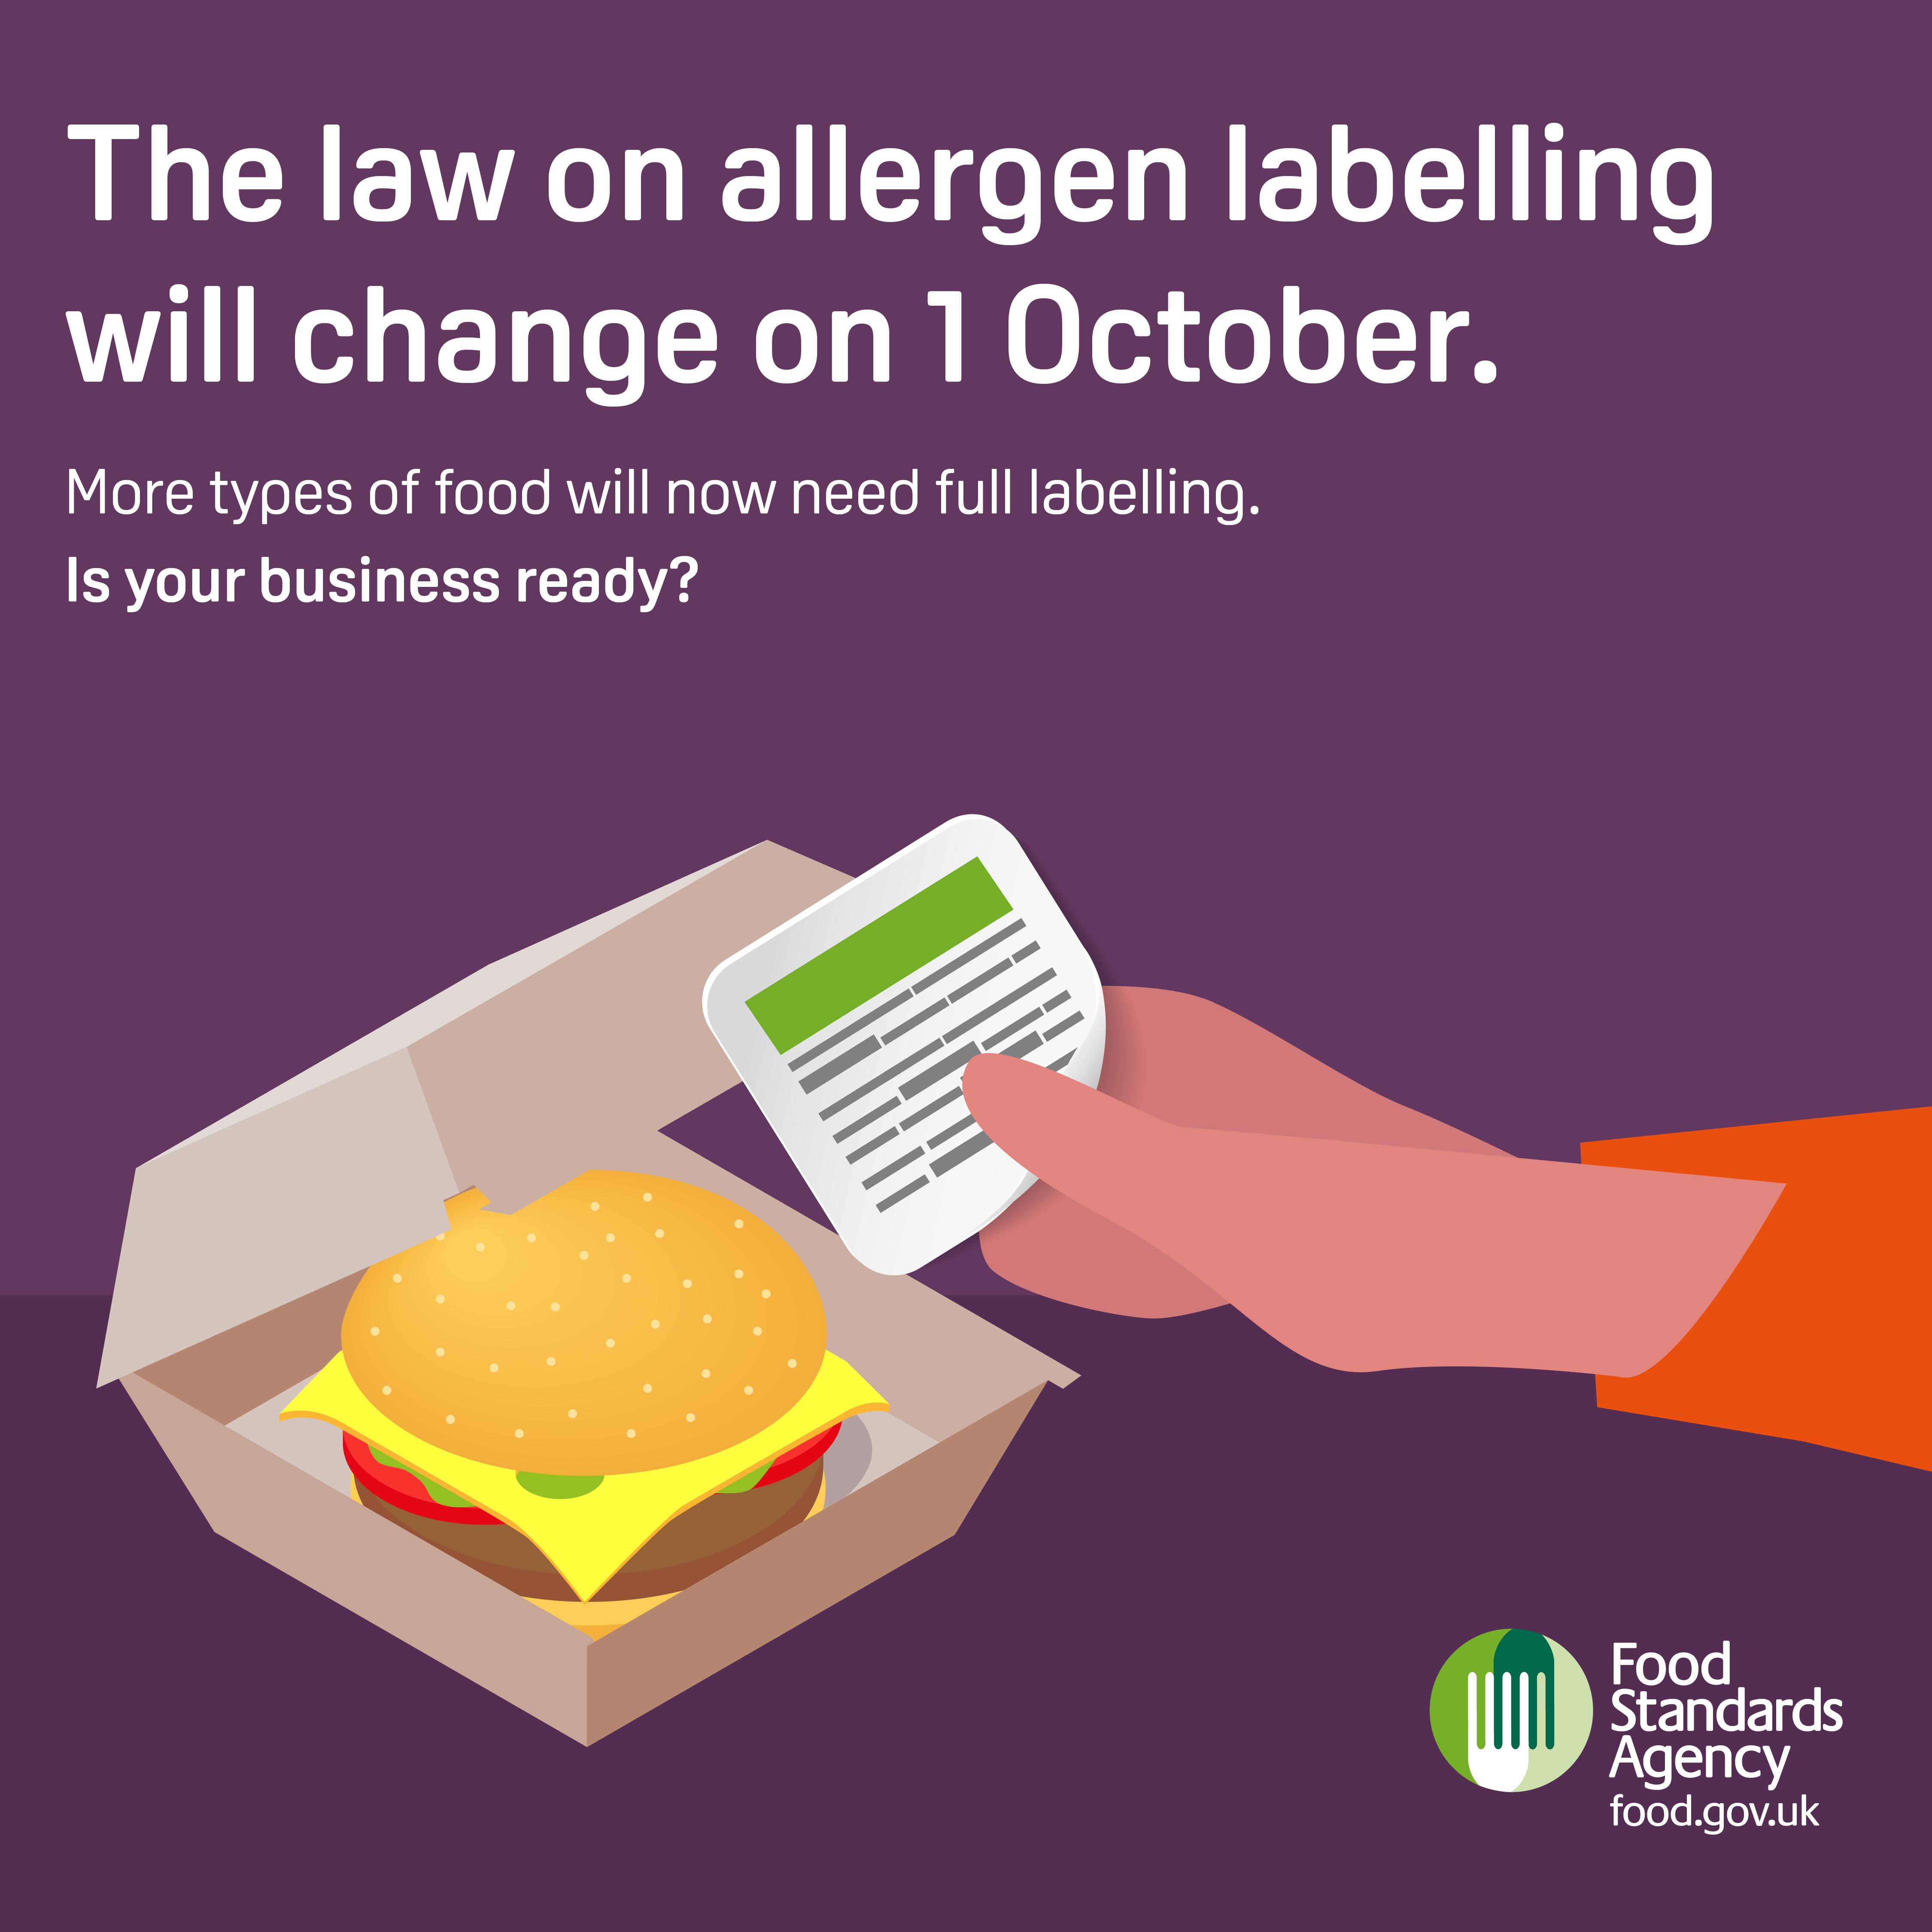 The law on allergen labelling will change 1 October 2021 - Burger